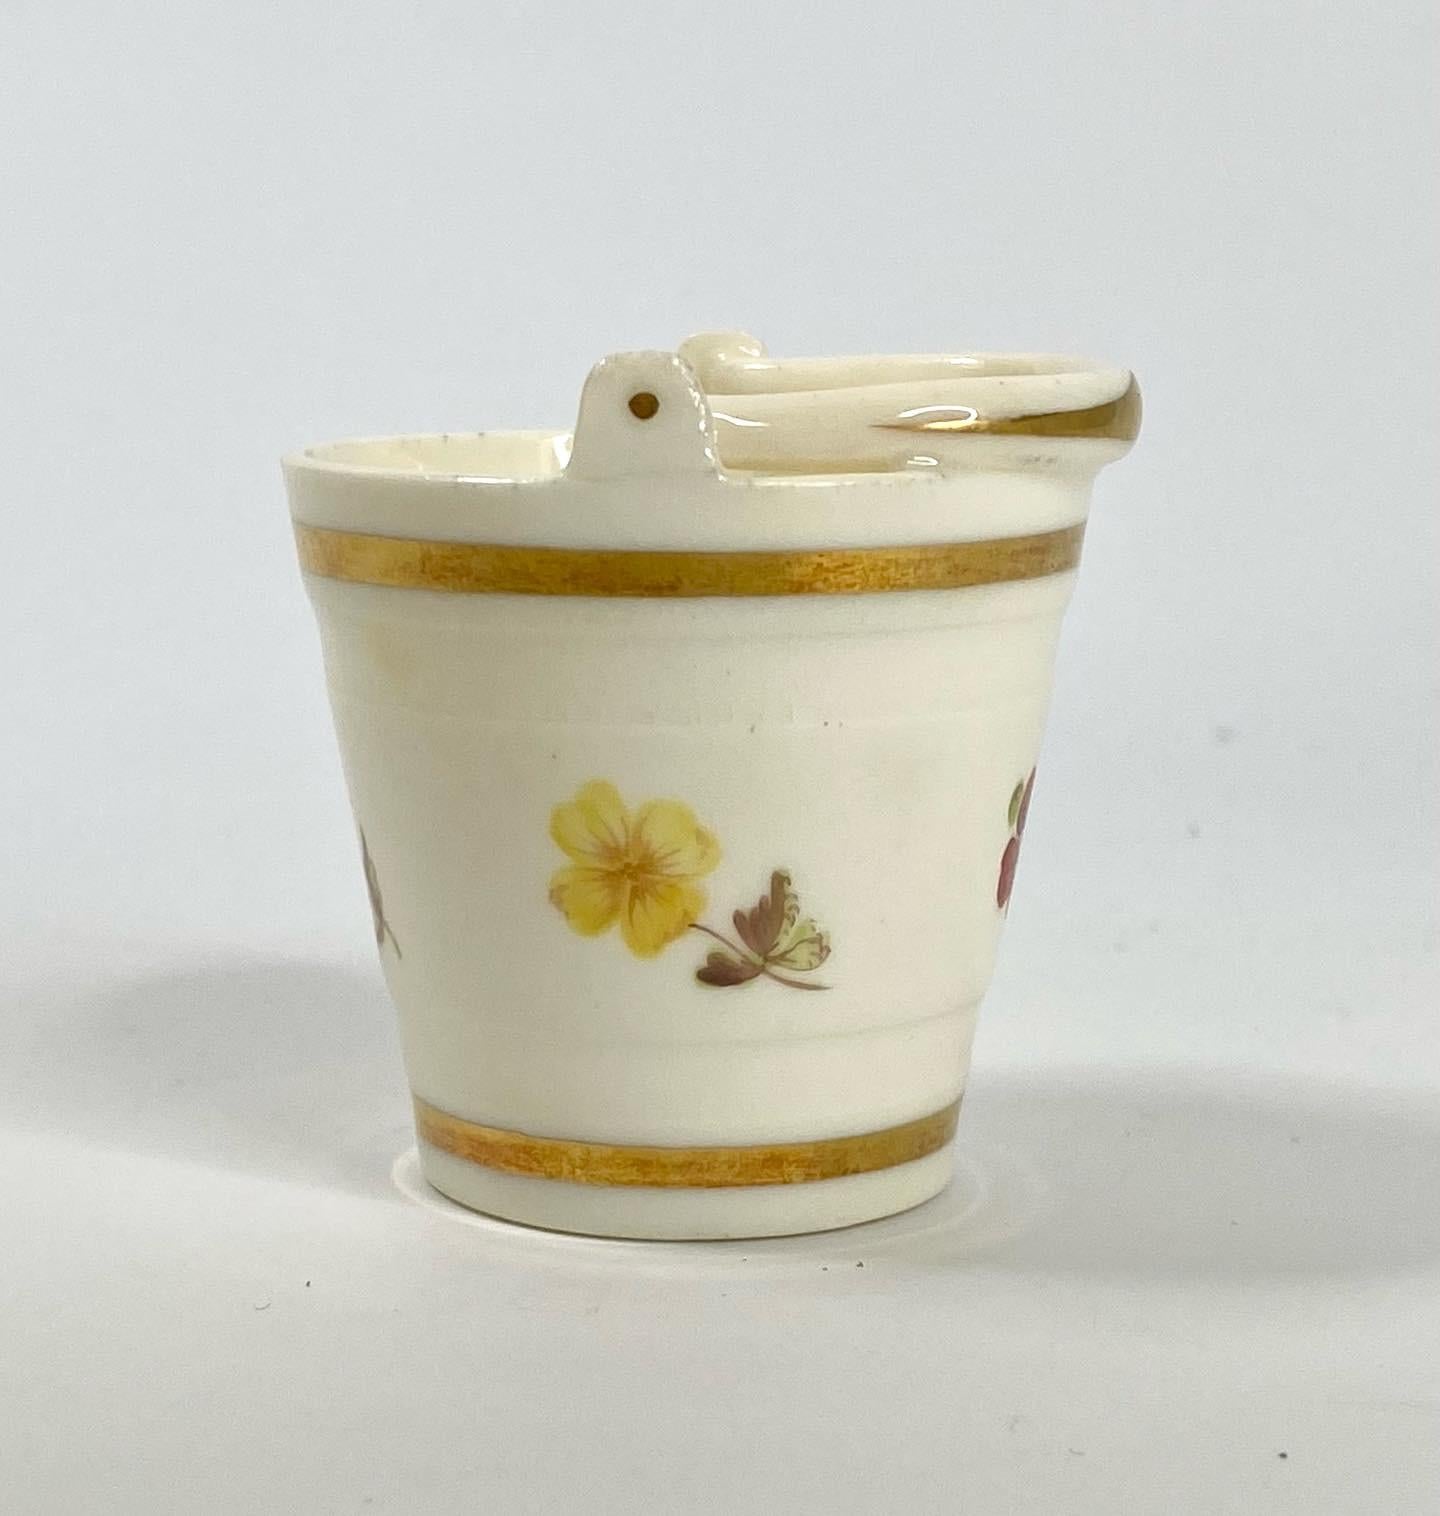 A rare Rockingham porcelain ‘Toy bucket’, 1826-1830. Modelled as a small, conical shaped bucket, with a lowered swing handle.
Hand painted to the body with flowers, between gilt bands, and gilt decoration to the handle.
Printed factory mark, and